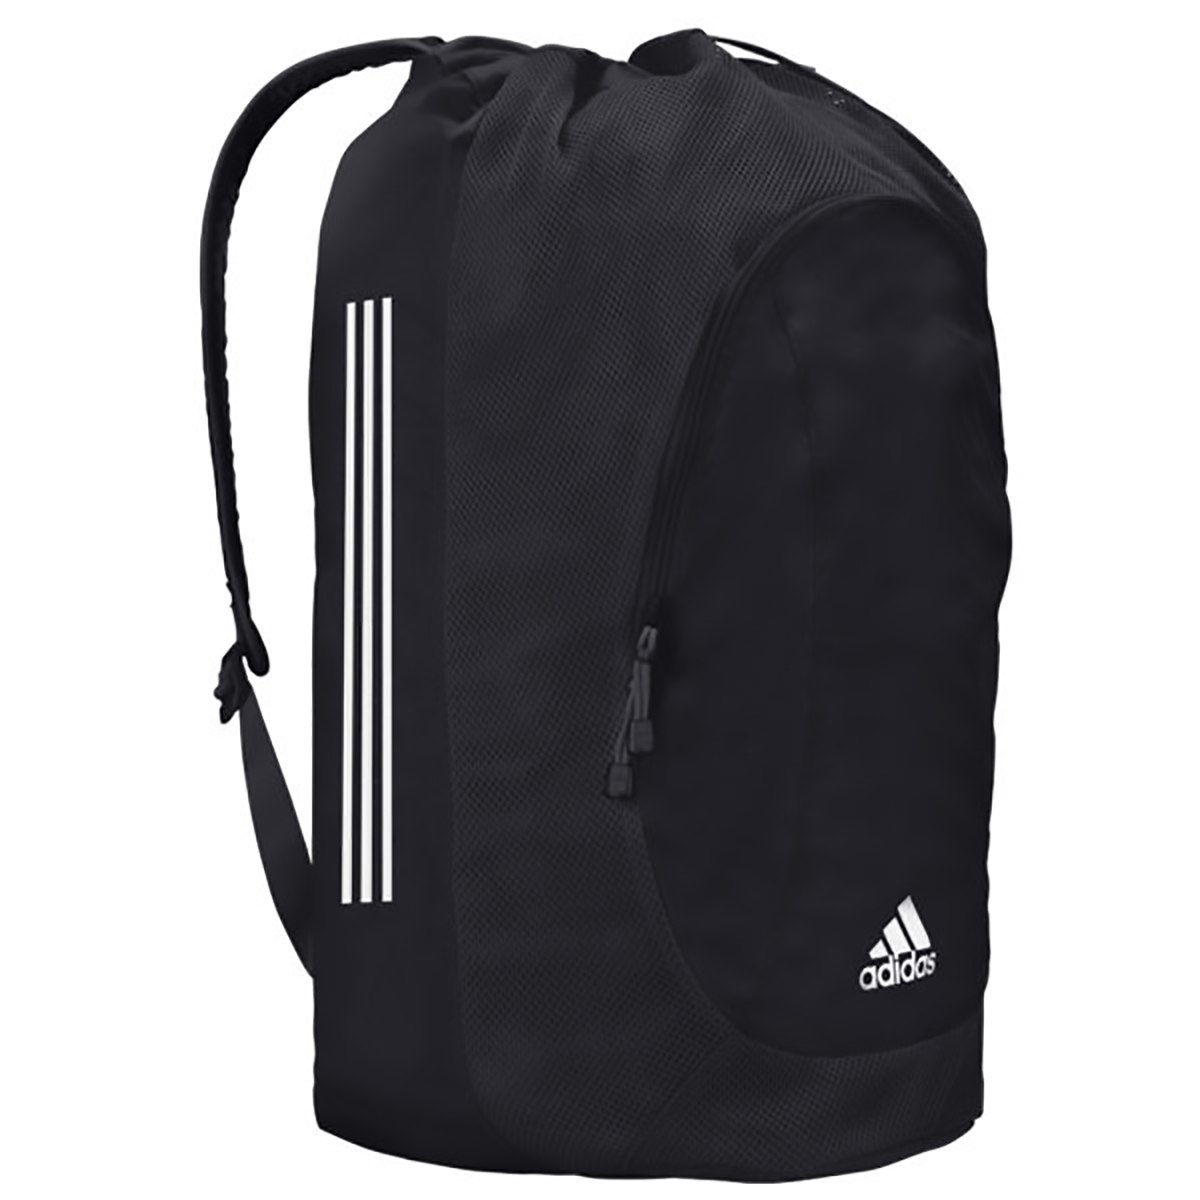 Adidas Wrestling Gear Bag 2.0 A514720 - Various Colors - image 3 of 4